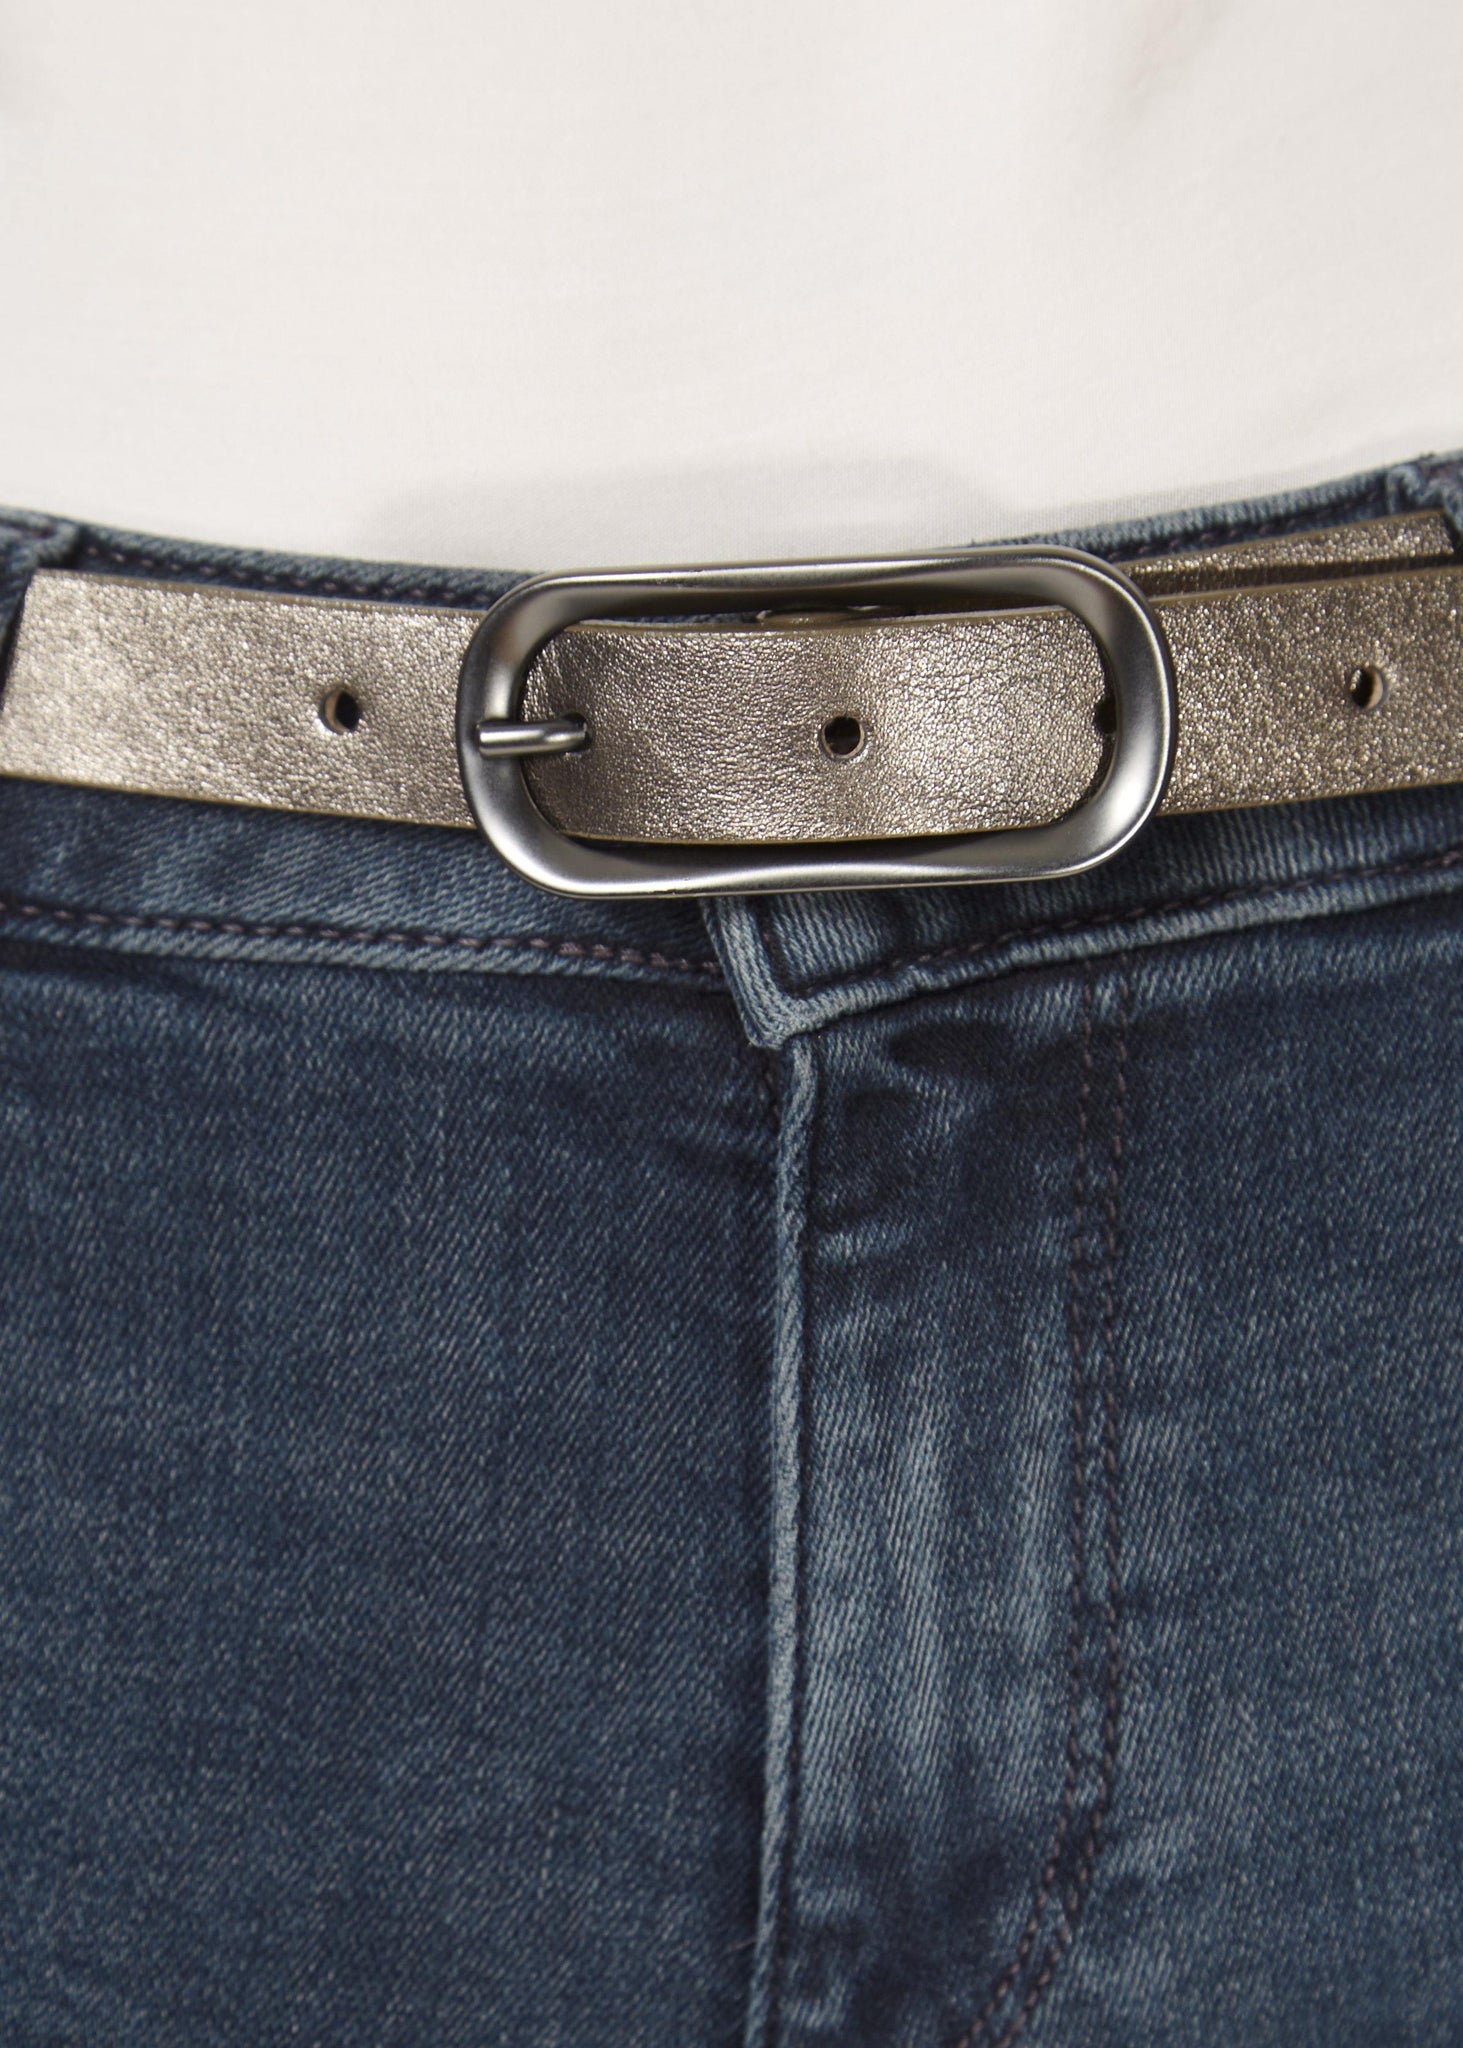 'Clear' Thin Shimmery Pewter Belt - Jessimara